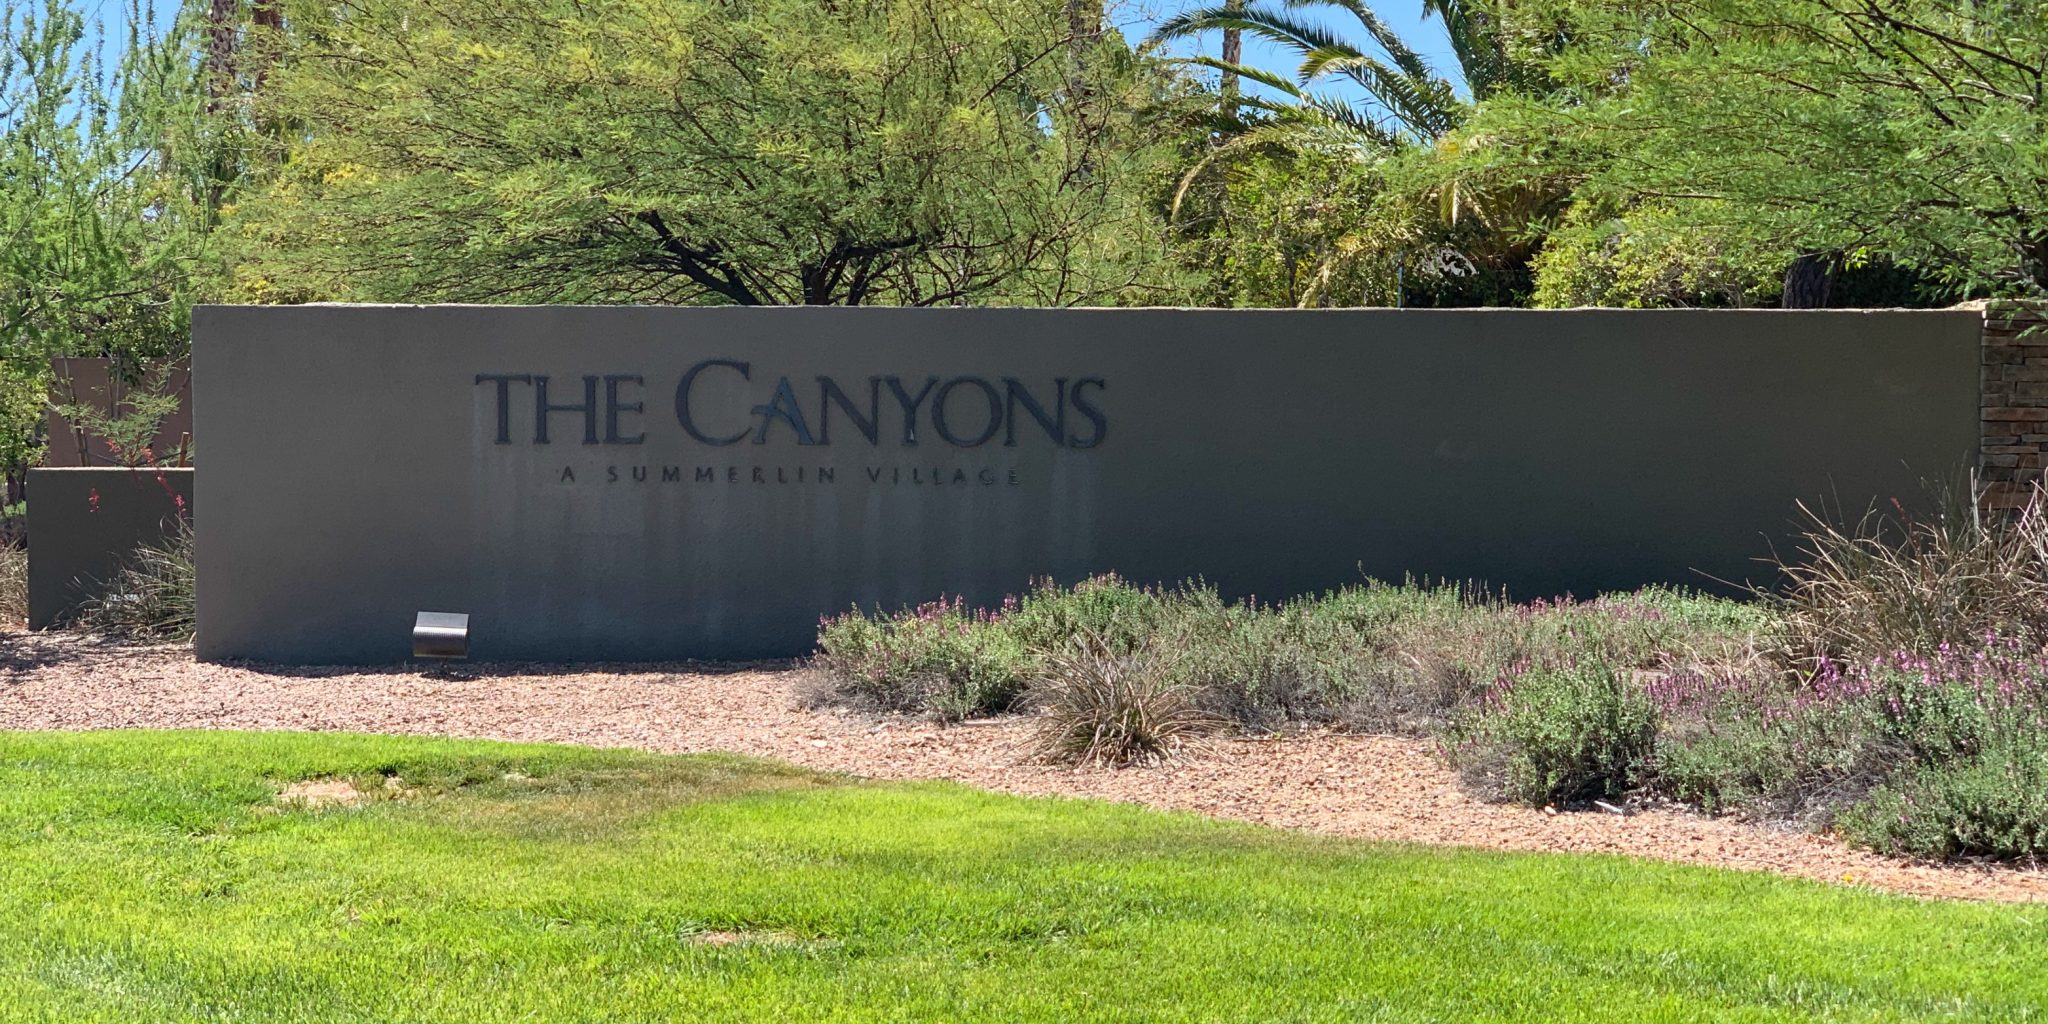 The Canyons Village